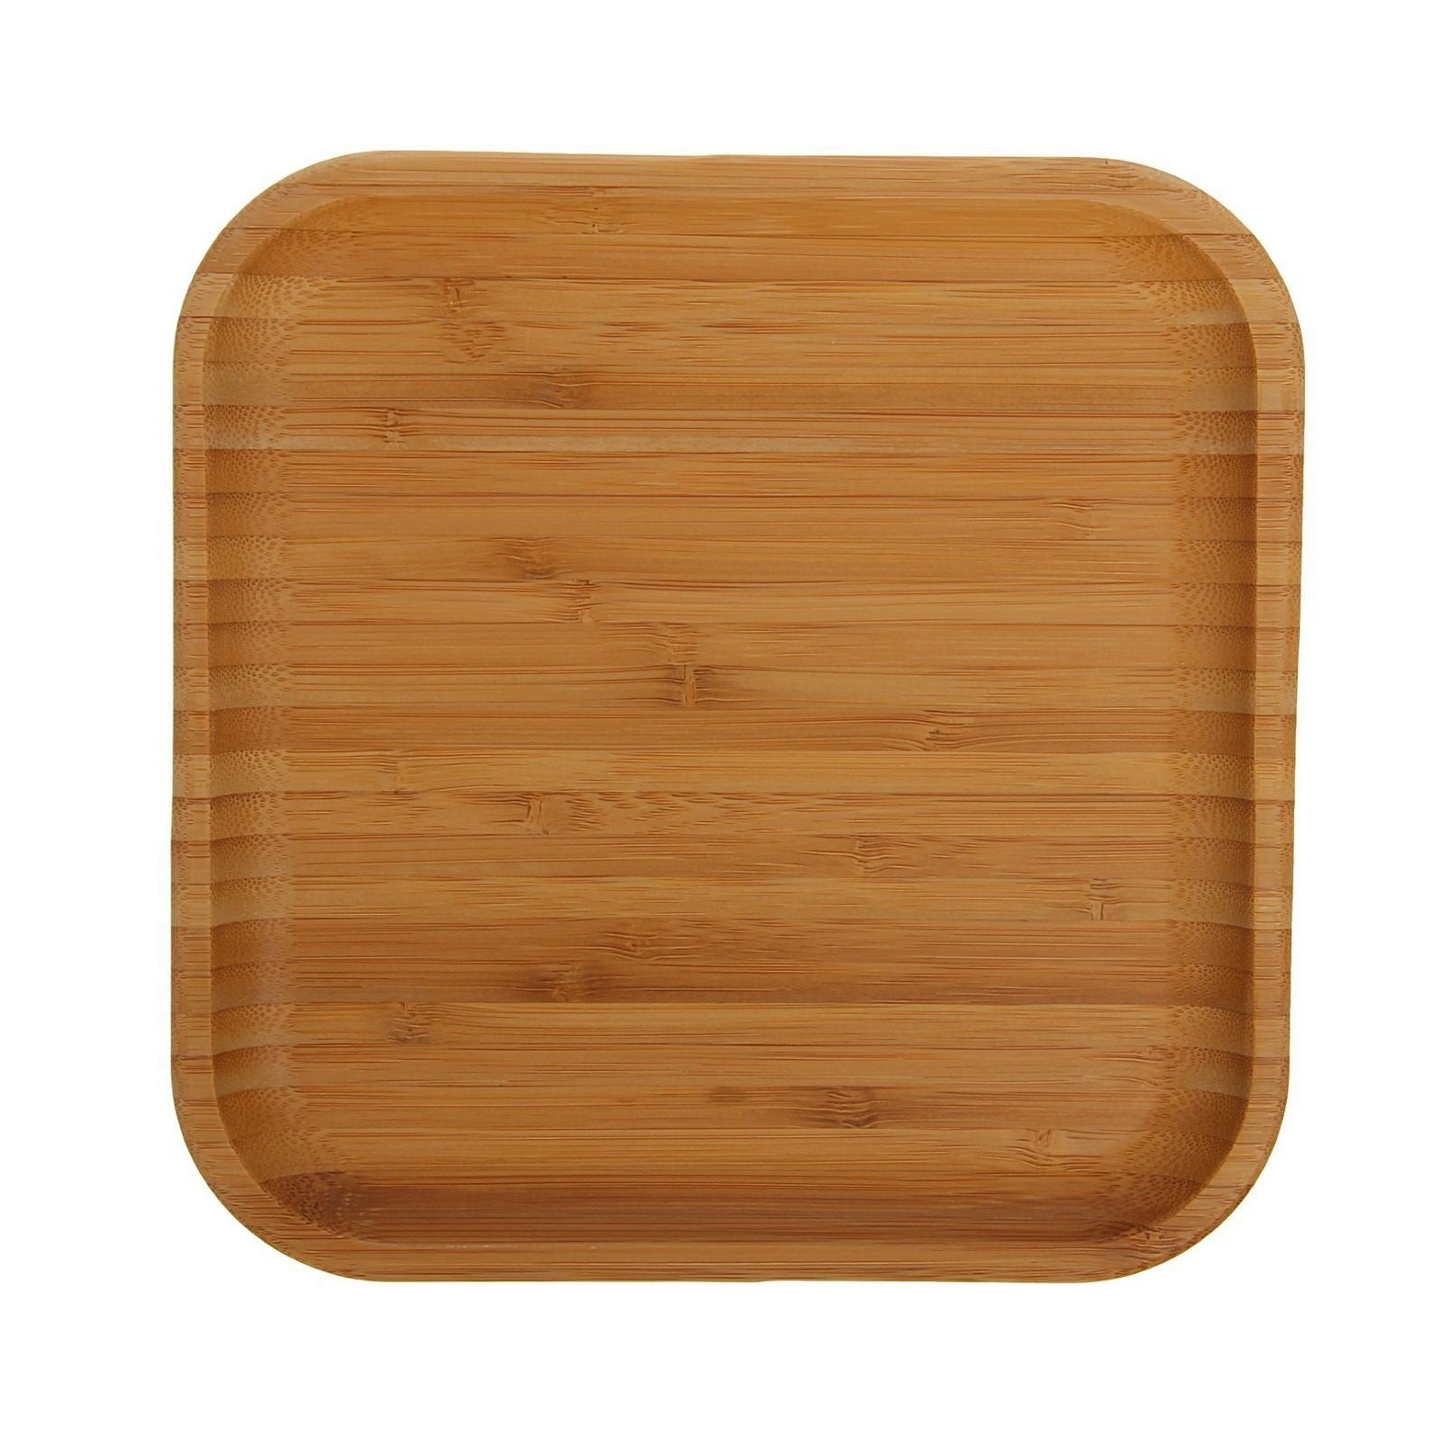 Wilmax Bamboo Wood Square Plate 8" X 8" |  For Appetizers / Barbecue  WL-771021/A